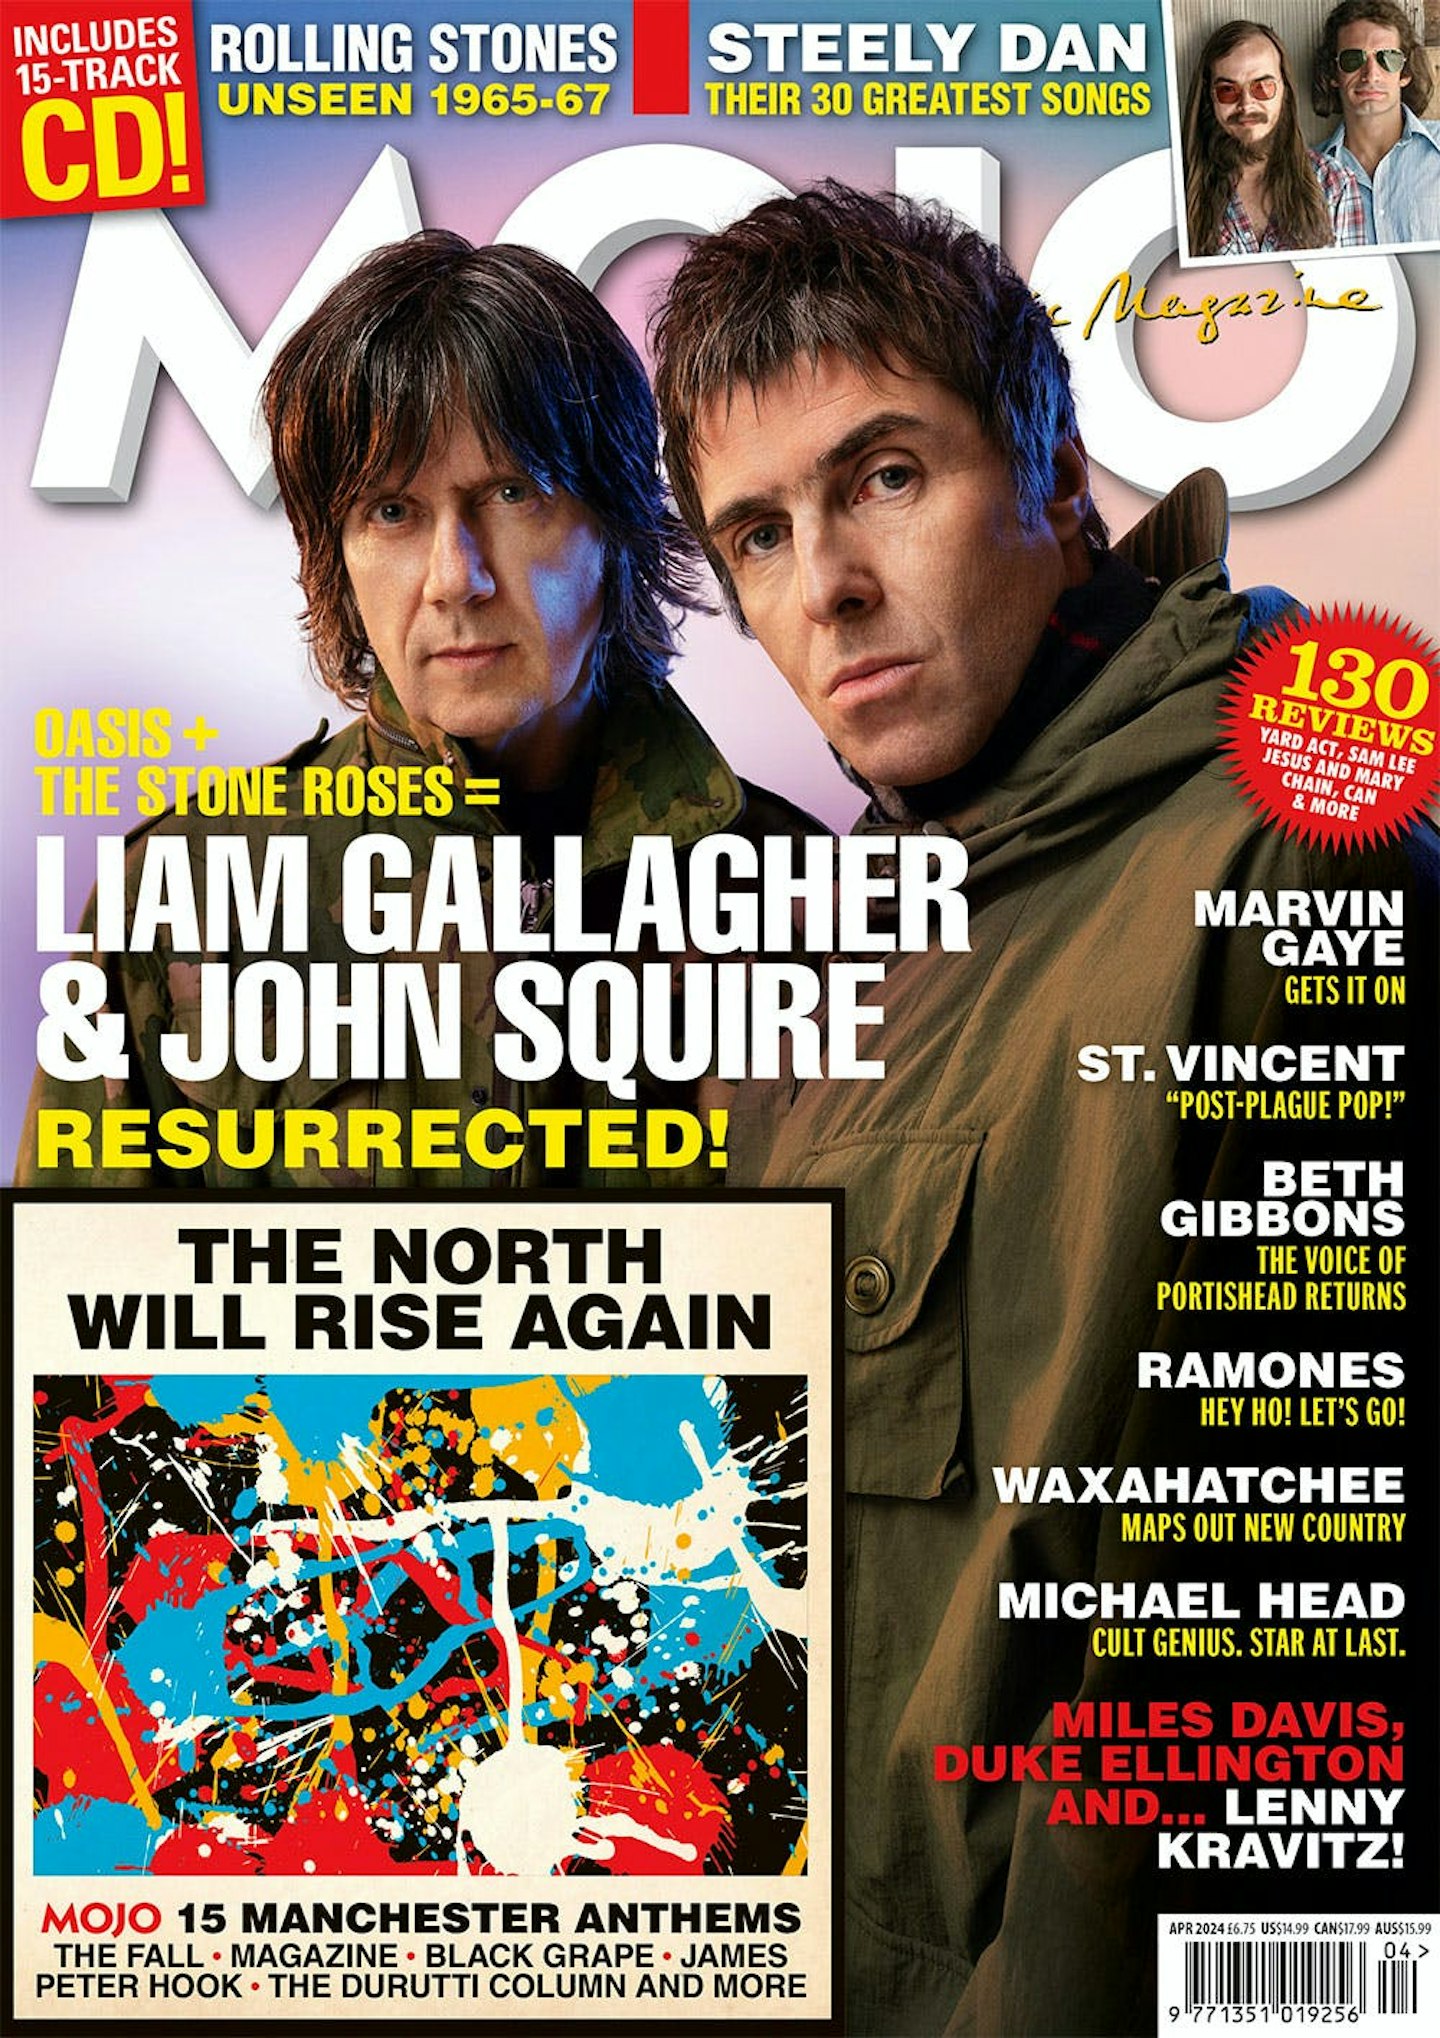 MOJO 365, with cover stars Liam Gallagher and John Squire